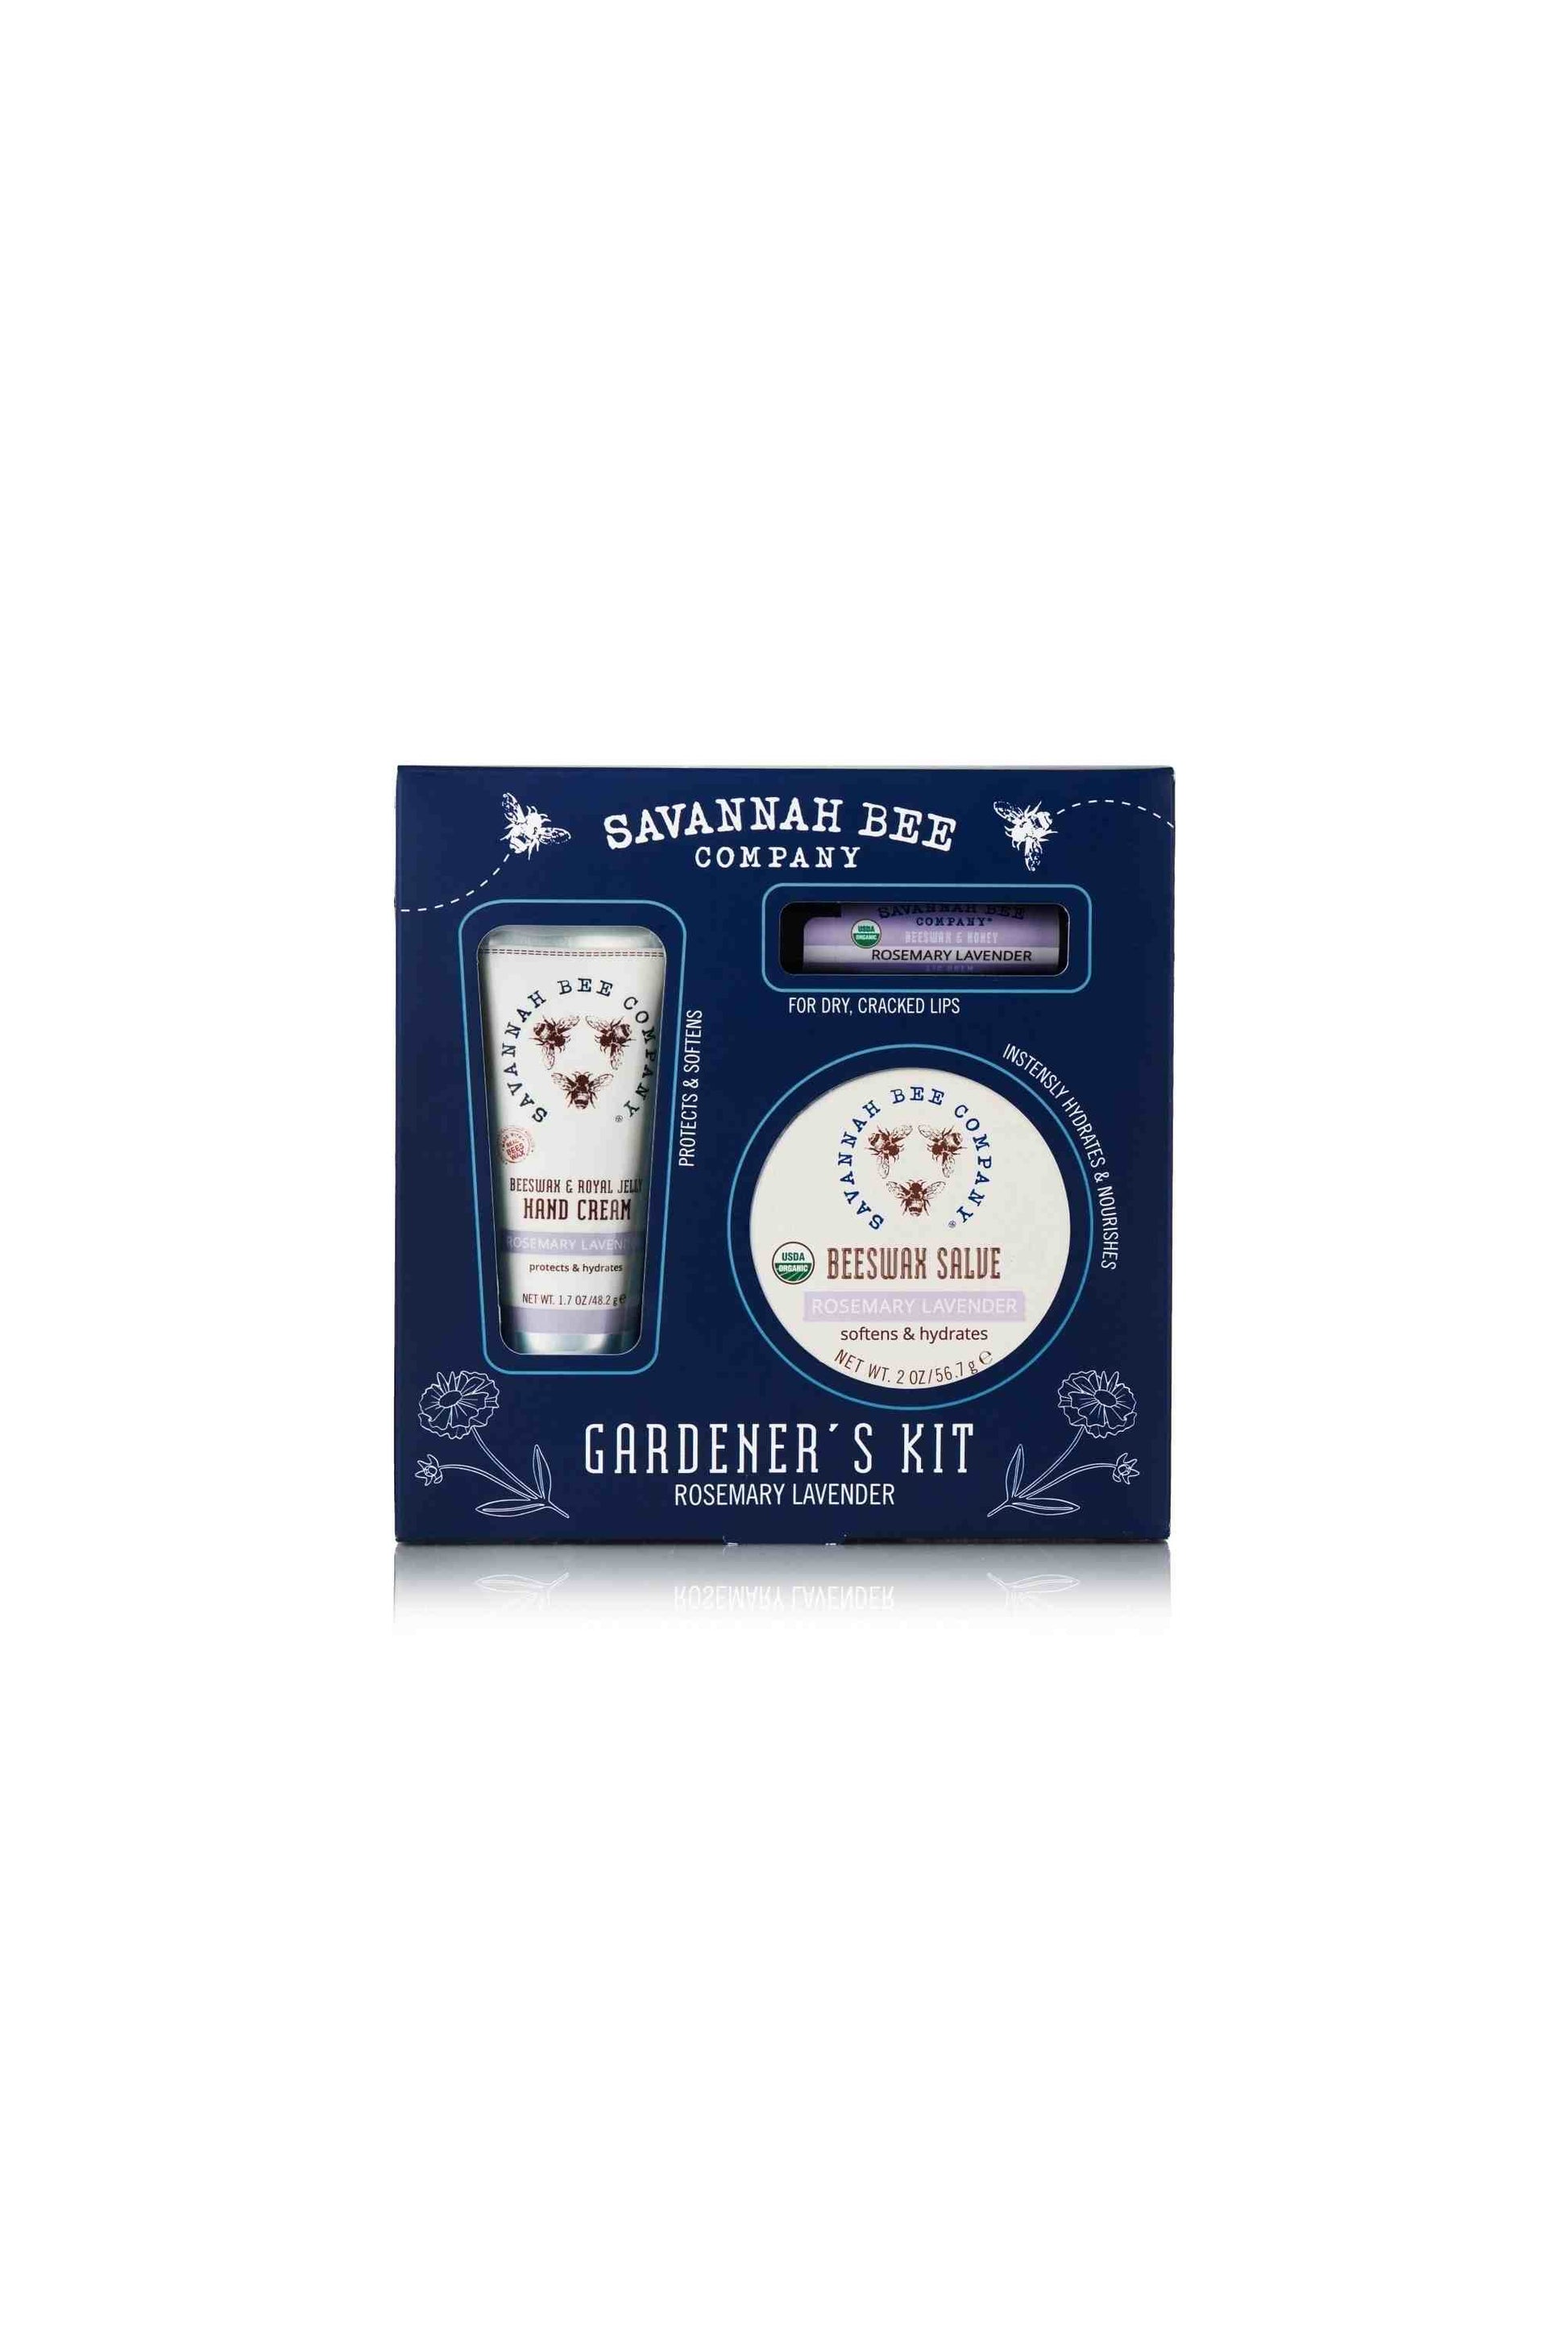 Rosemary Lavender Gardener's Kit contains  Rosemary Lavender Beeswax Royal Jelly Hand Cream, Rosemary Lavender Lip Balm and Beeswax Salve in blue packaging